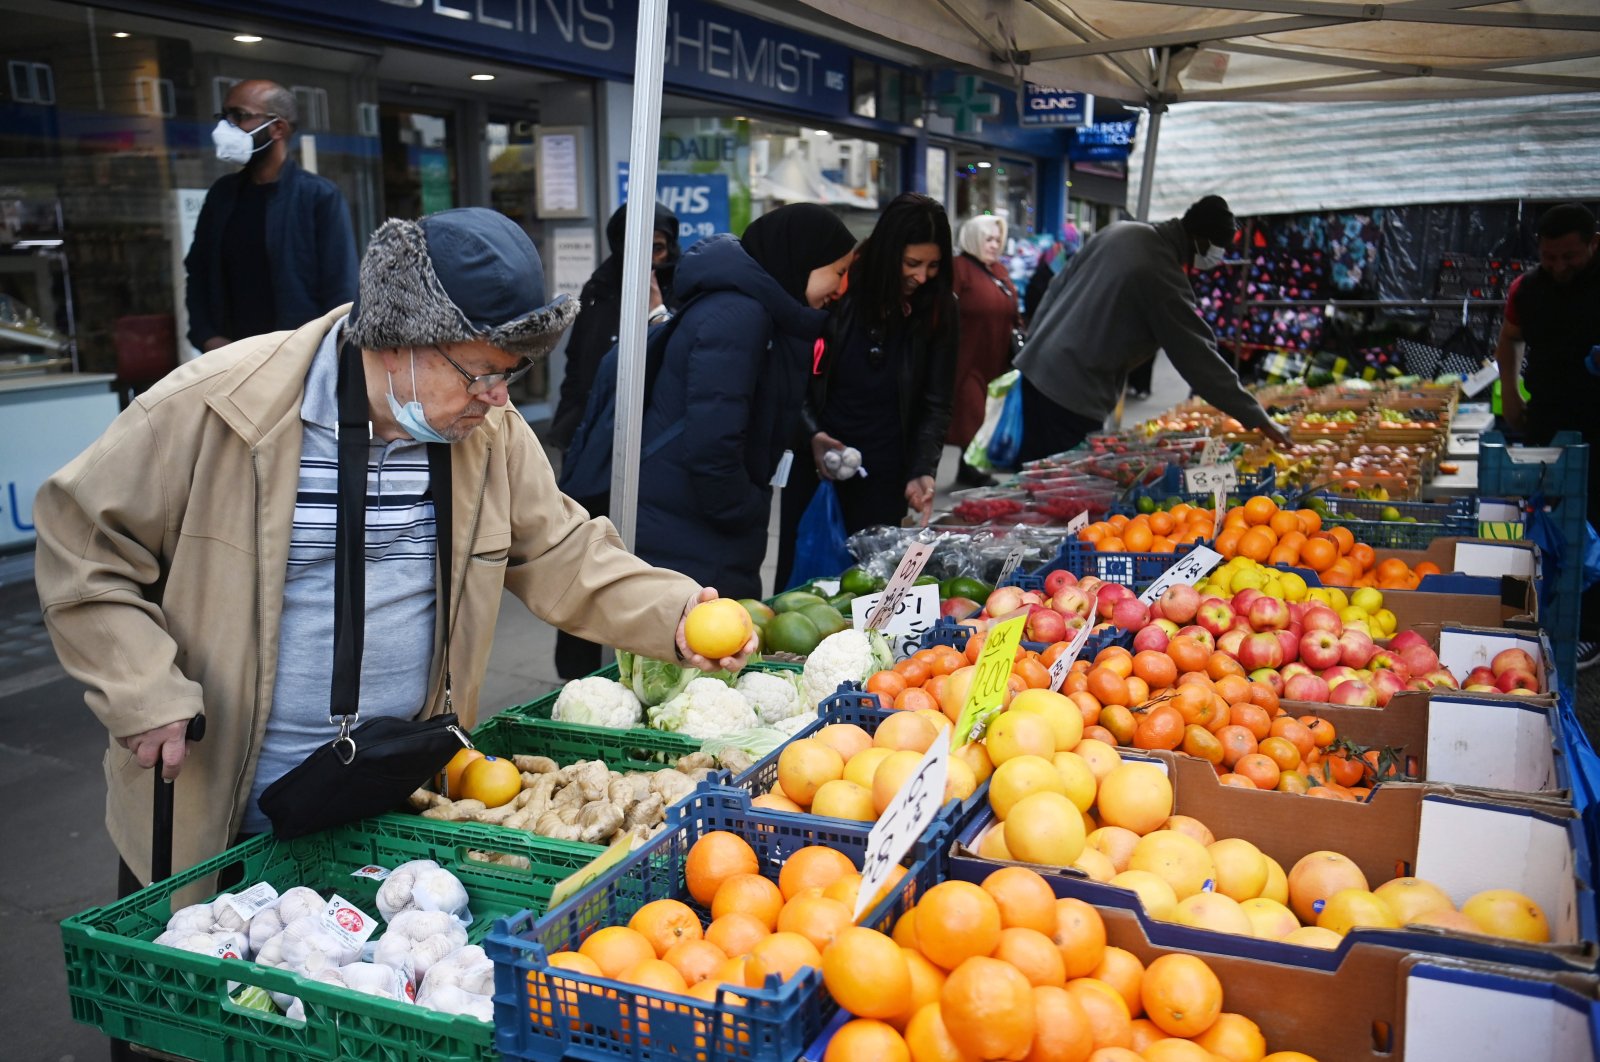 A man purchases fruit on a market stall in London, U.K., April 26, 2022. (EPA Photo)